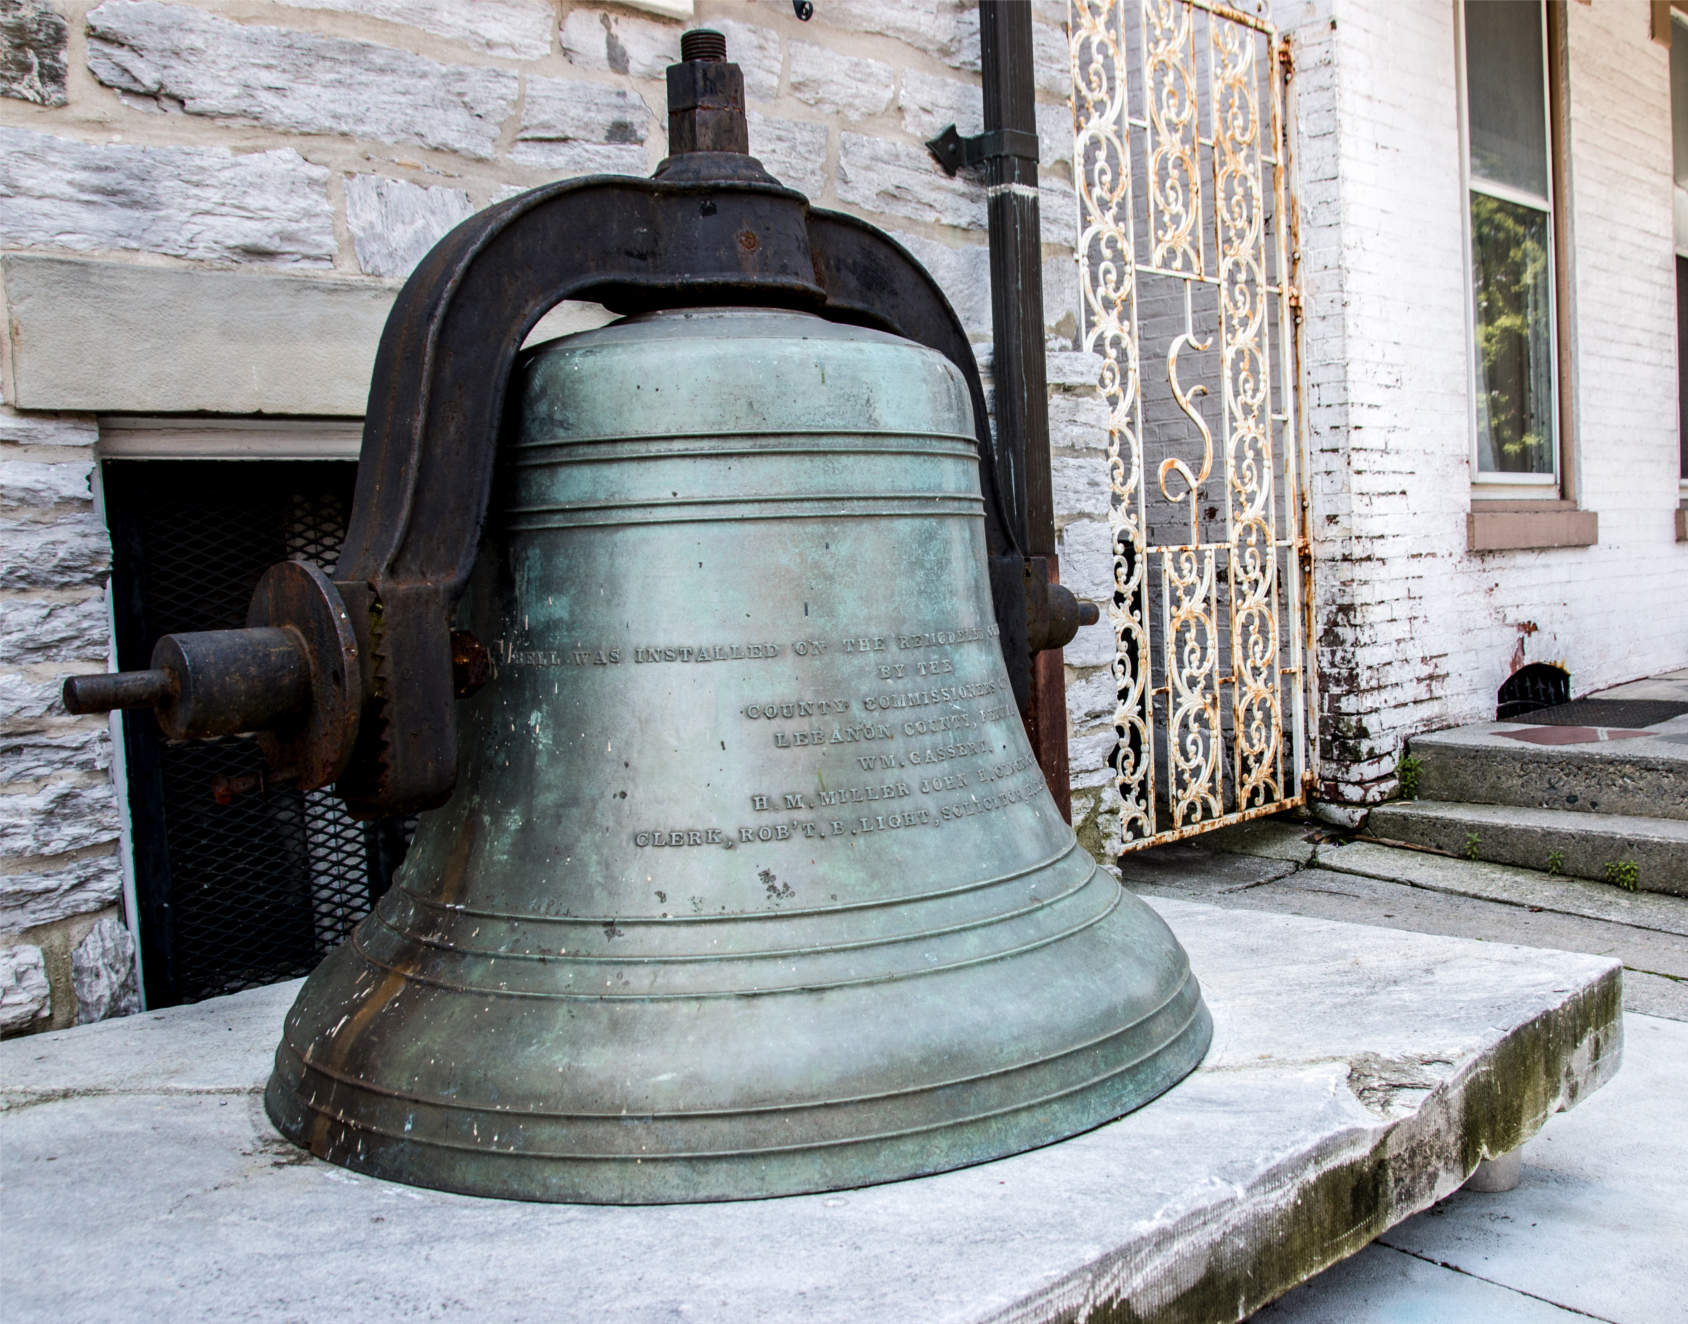 2nd Courthouse Bell in front of Lebanon County Historical Society